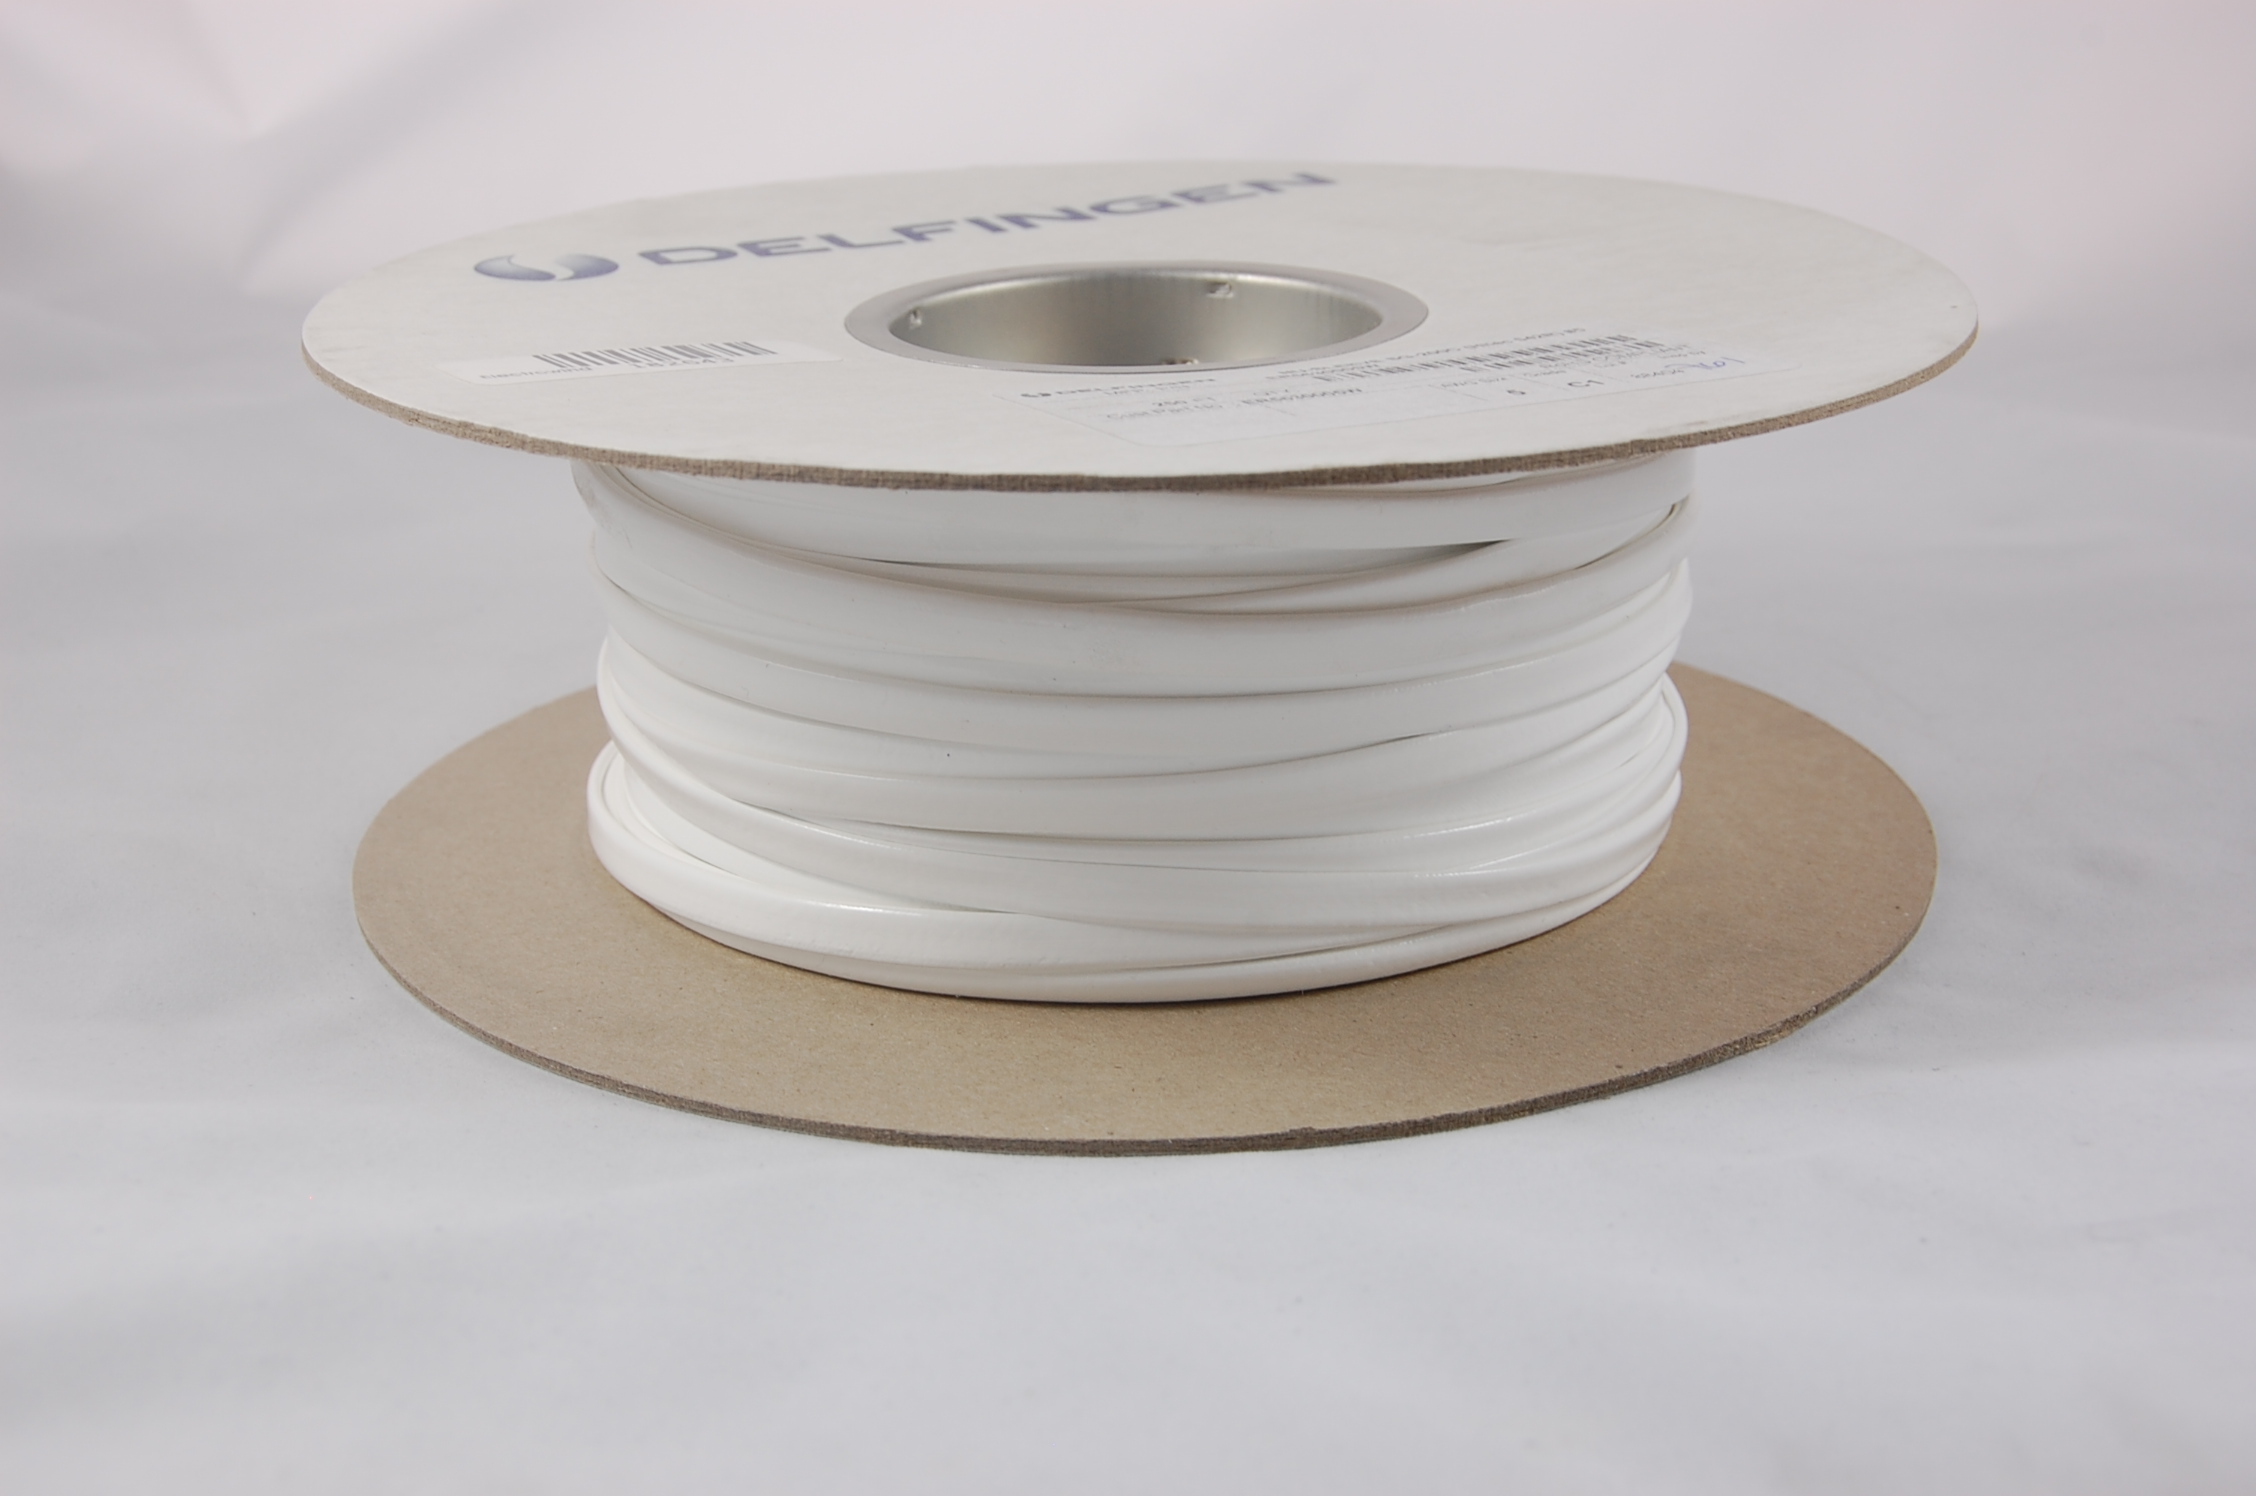 1 INCH AWG NU-SLEEVE SG-200 C-1 (2500V) Silicone Rubber Coated Braided Fiberglass Sleeving (542F) 200°C, white, 100 FT per spool